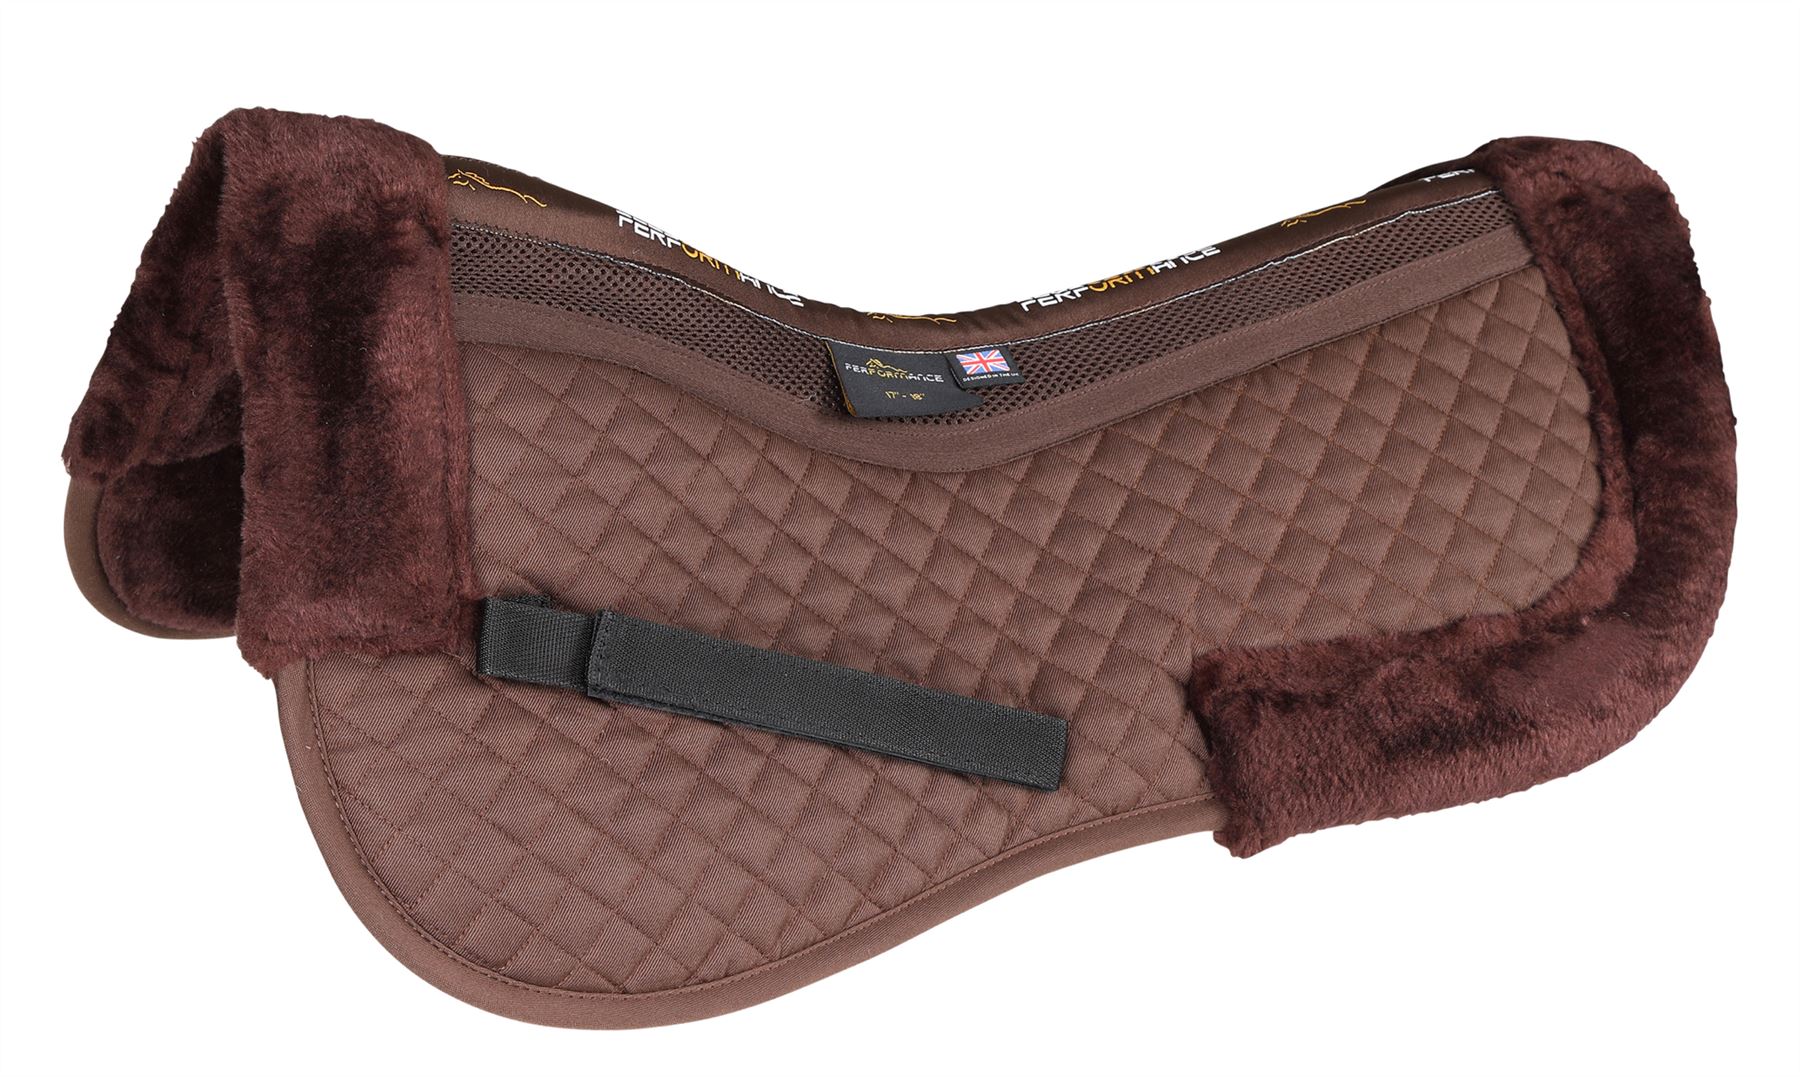 Shires Performance Fully Lined Half Pad - Just Horse Riders